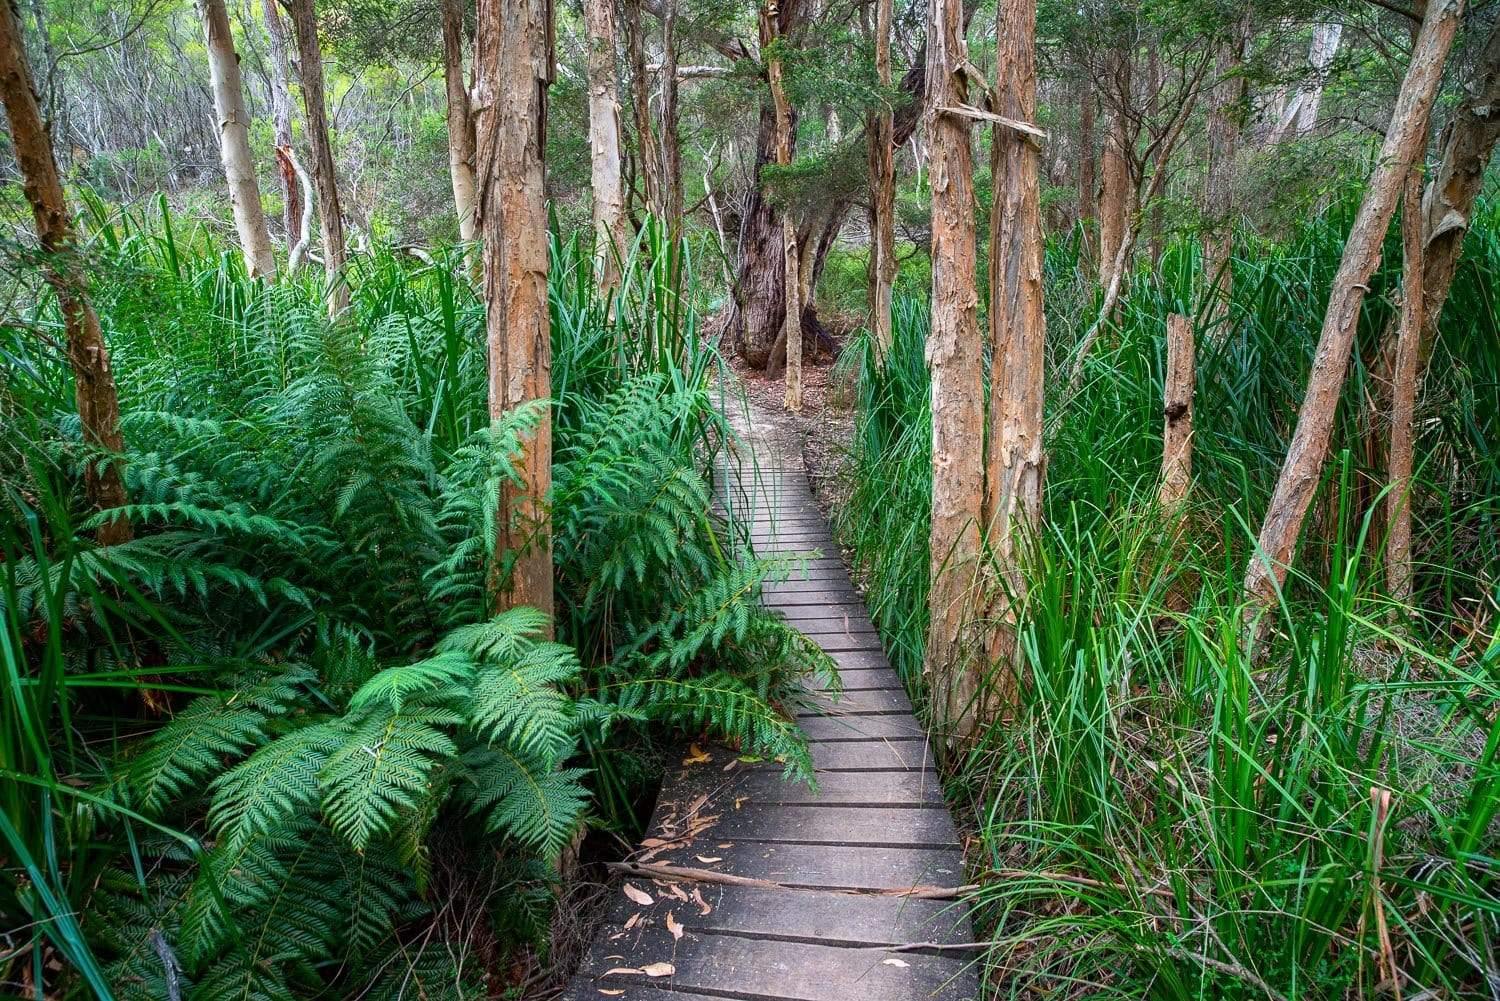 The wooden pathway between massive plants and trees in a forest, Refuge Track - Wilson's Promontory VIC